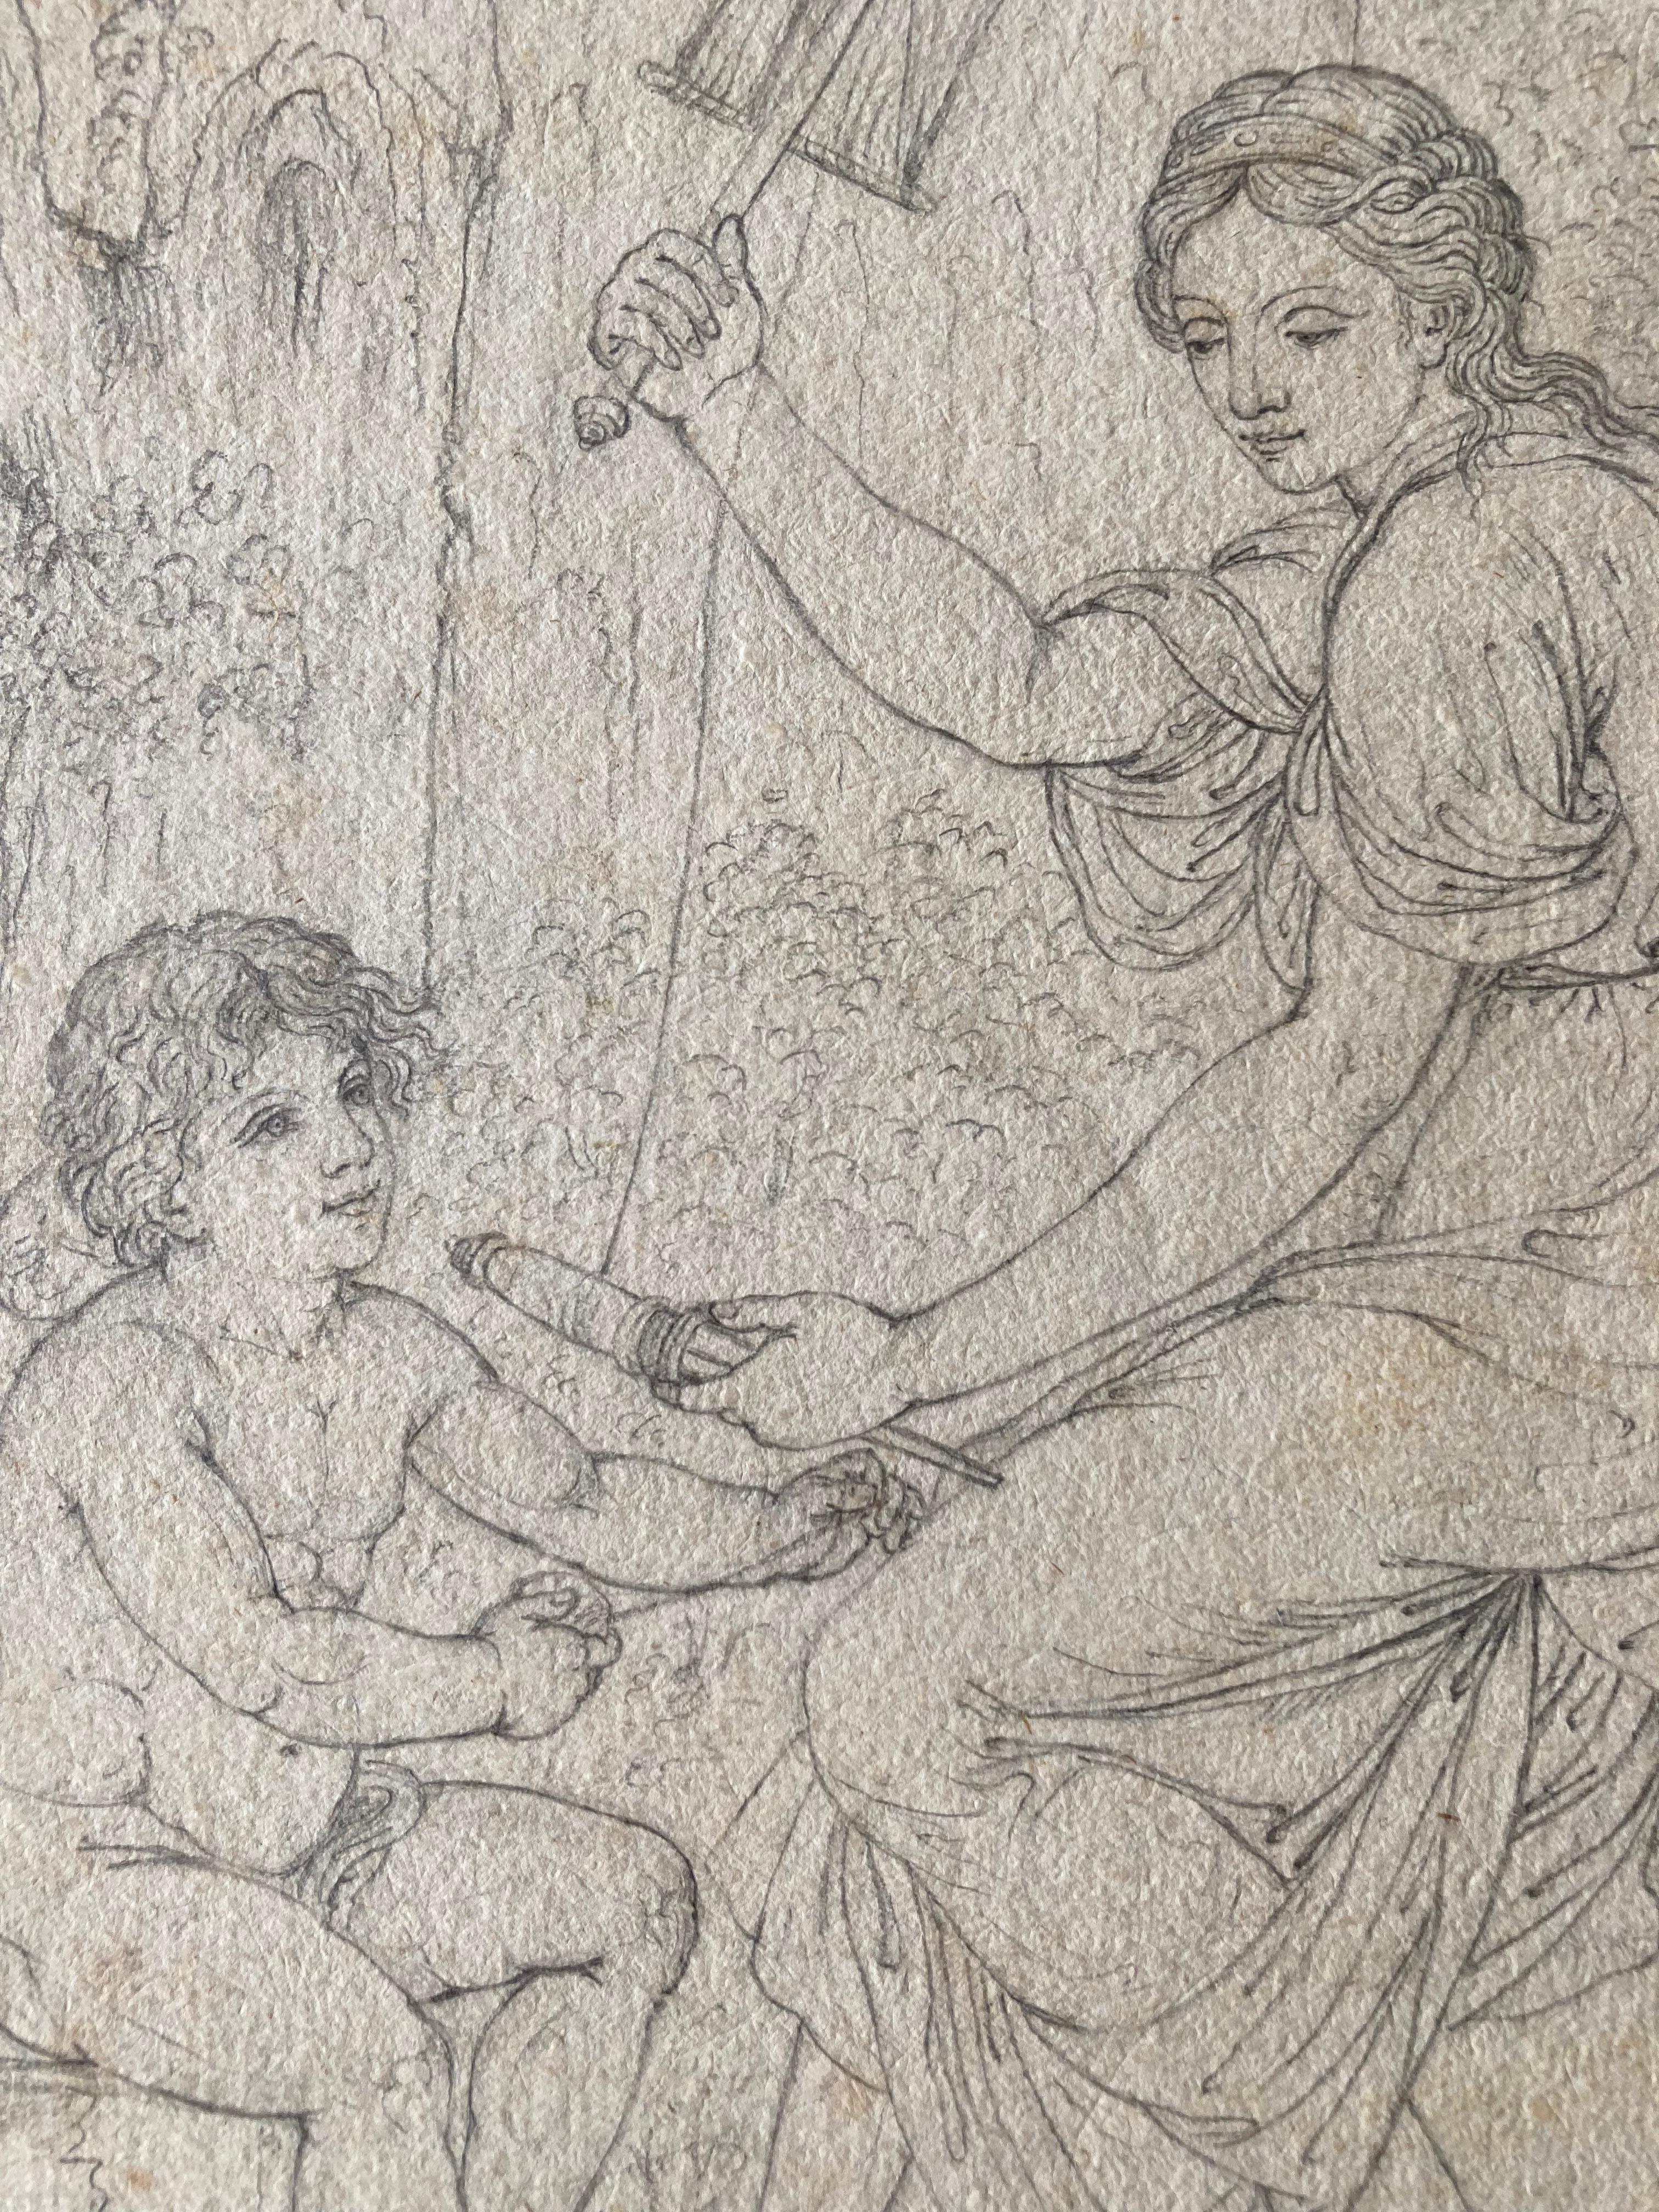 Fine drawing in pencil, oval format. Circle of Angelika Kauffmann. 
The subject is not clear. It is Amor with his arrows and perhaps Venus with a spindle. Both are weaving a thread. Perhaps the female might be Klotho, but this is not clear.
The